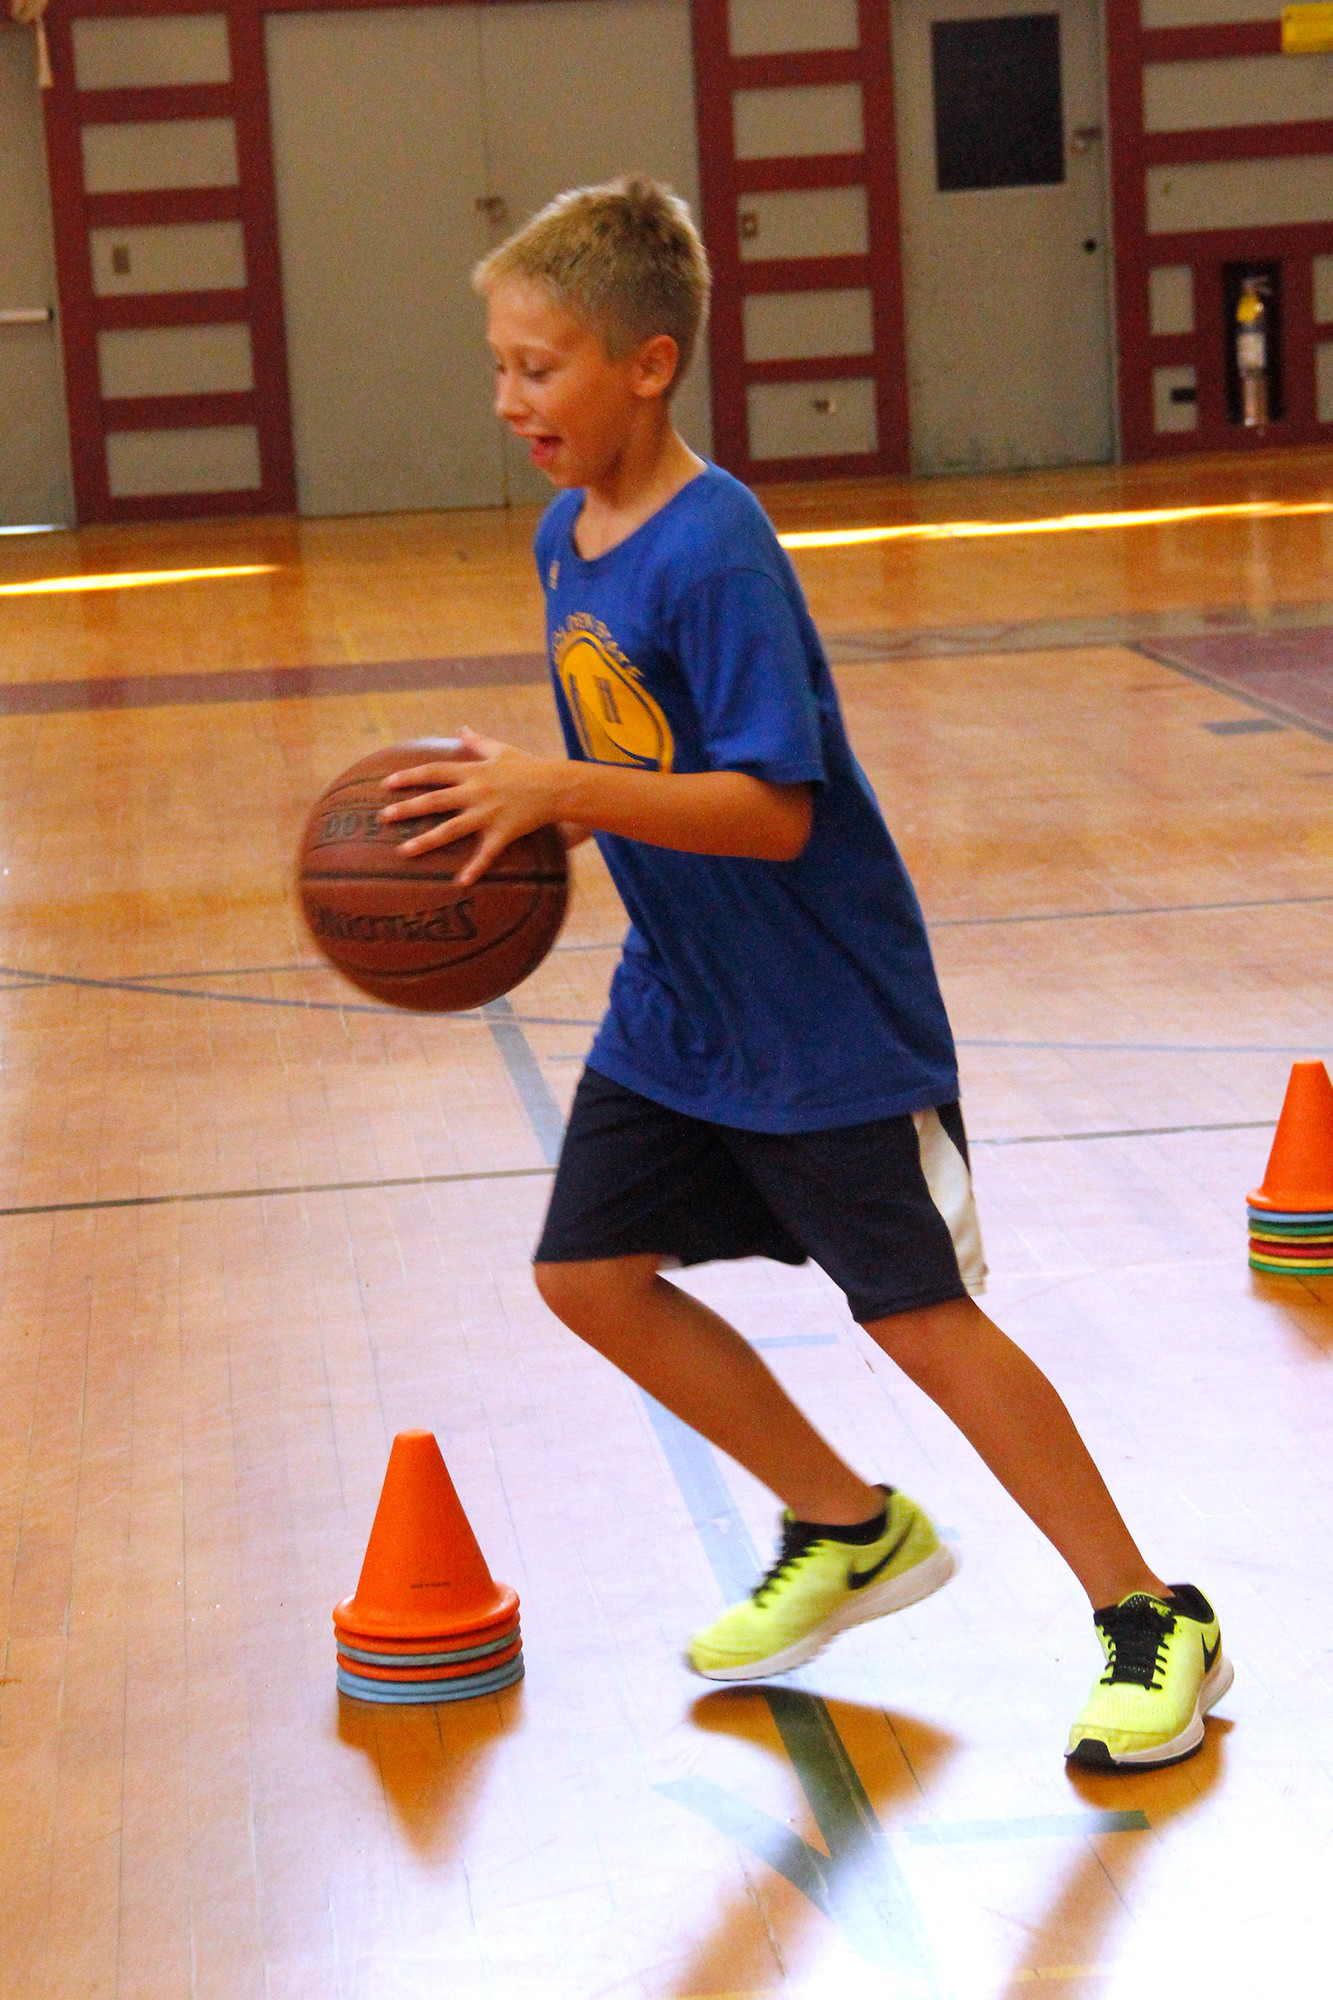 Sean Beitter worked on his dribbling skills. The students spent the hot day playing indoor sports in the air-conditioned gymnasium.